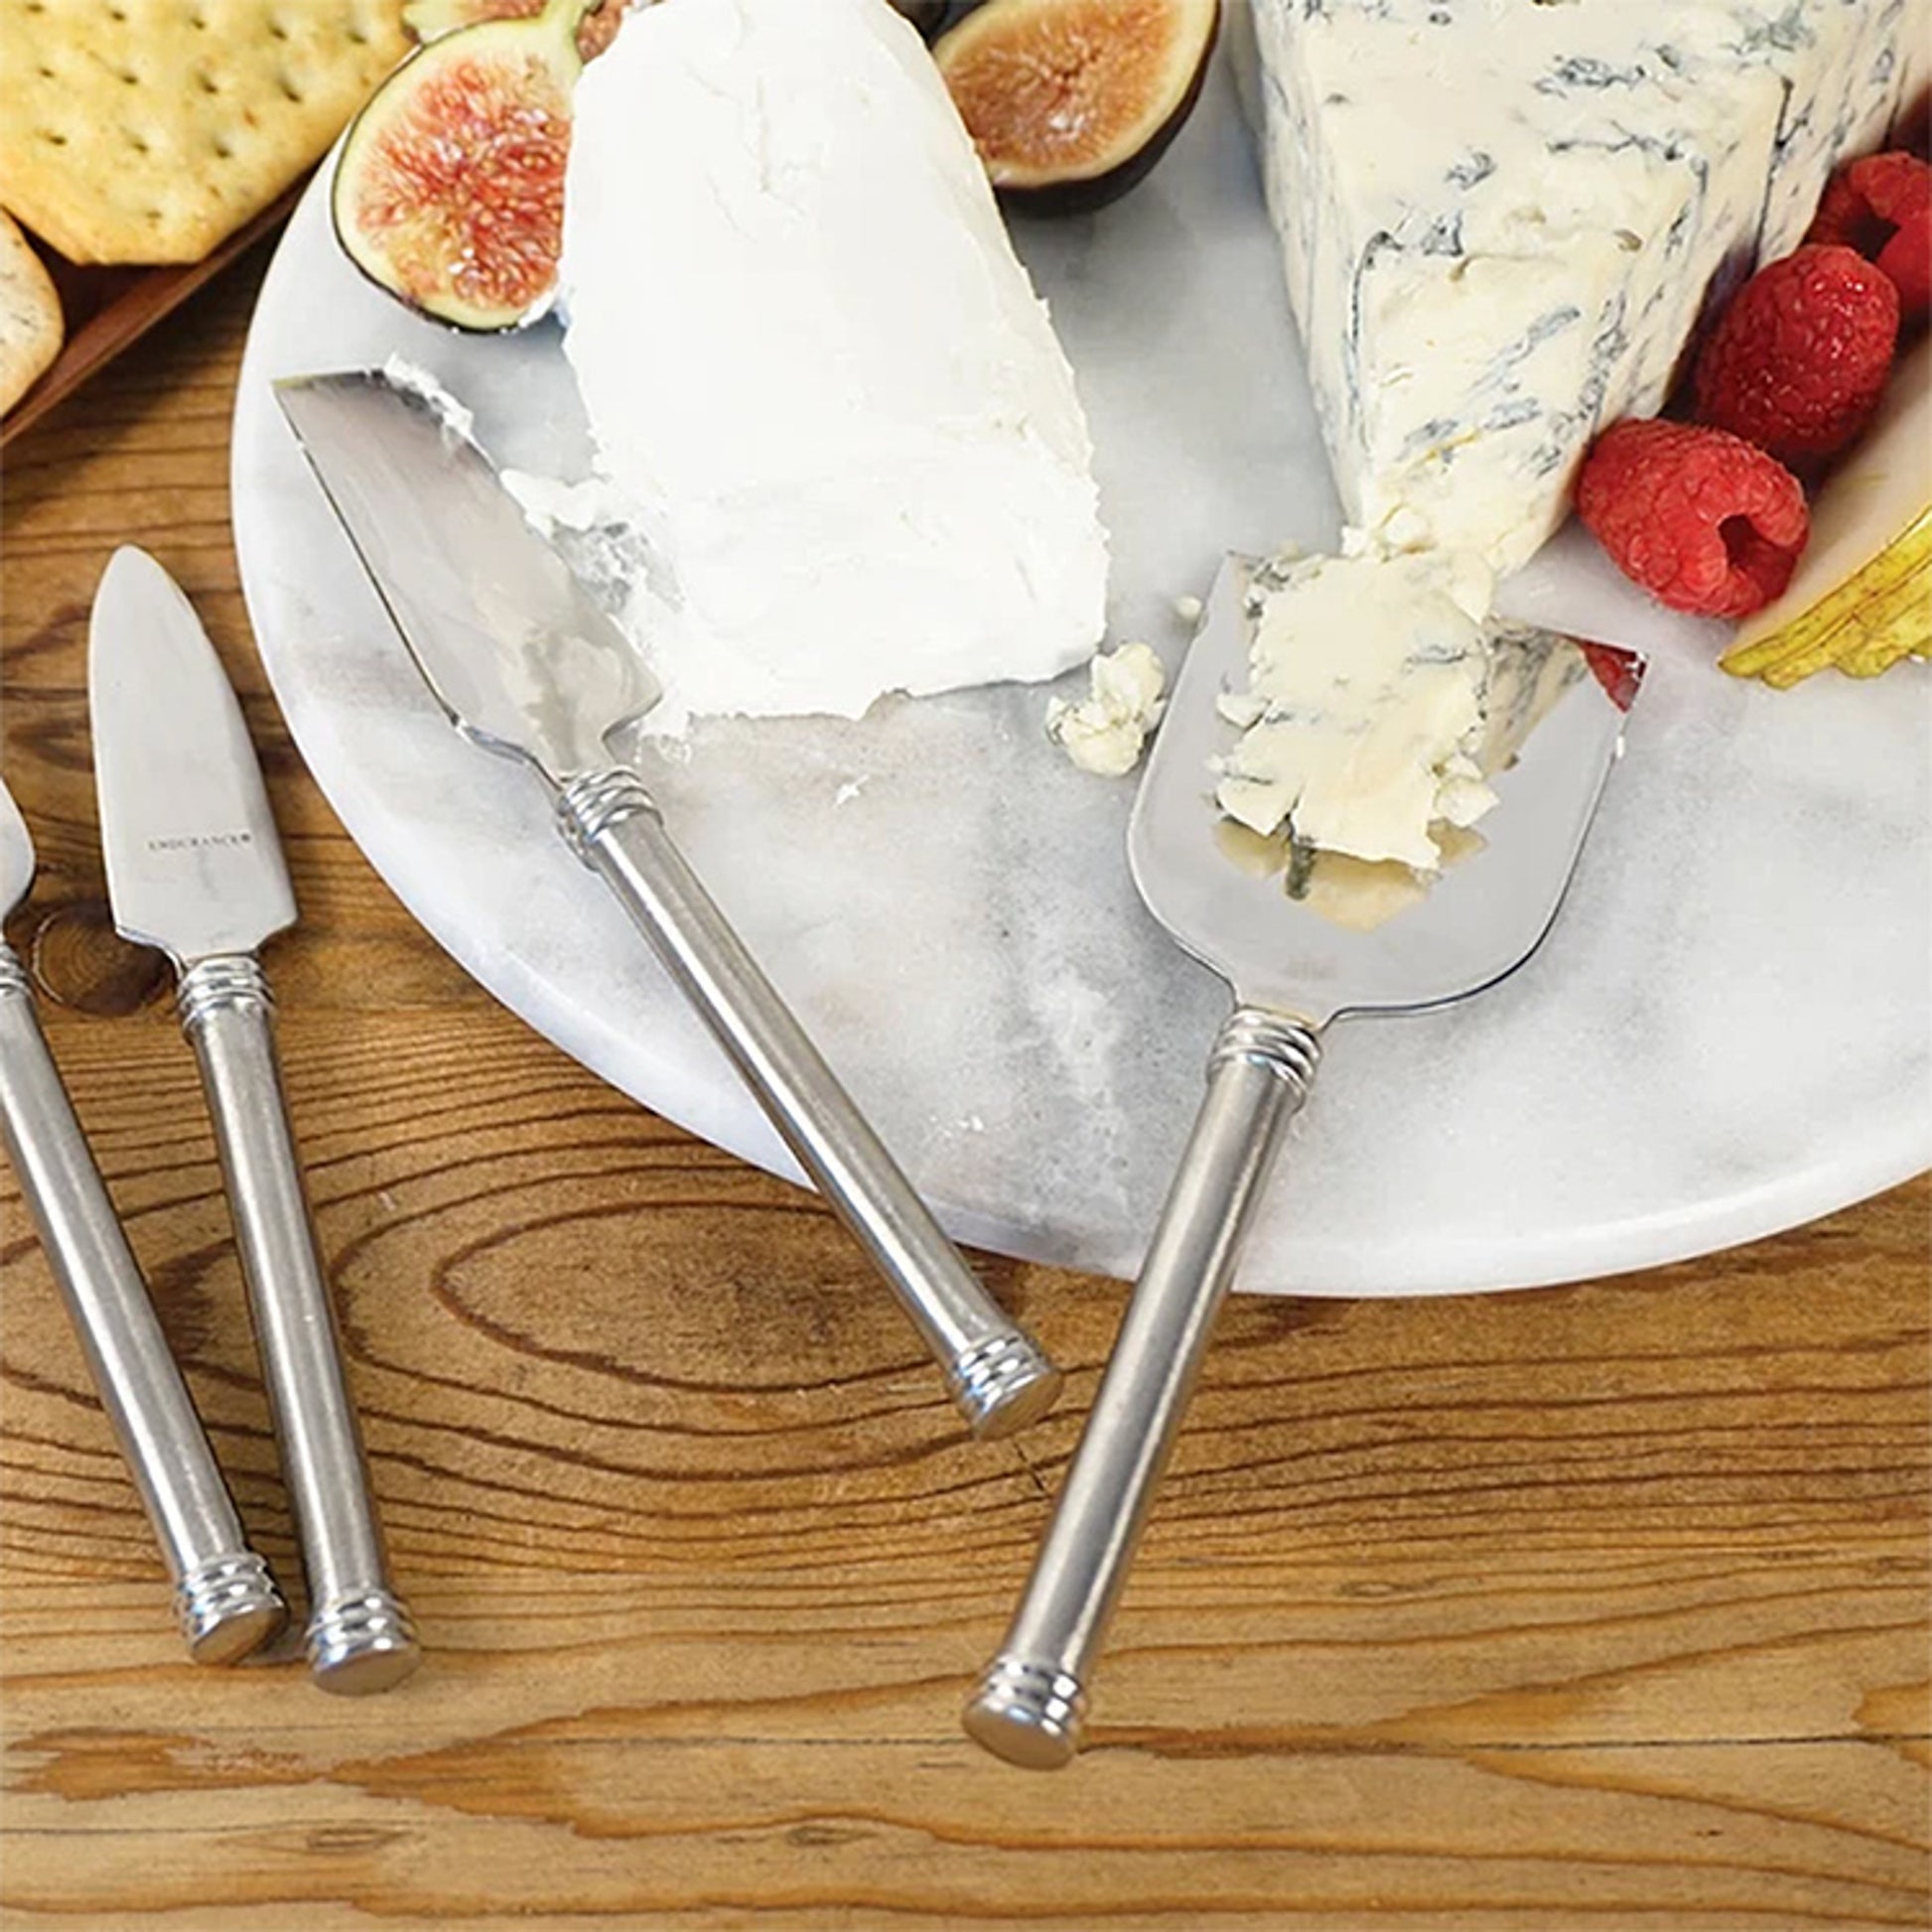 Cheese Slicer, Cheese Knives For Charcuterie Board, Stainless